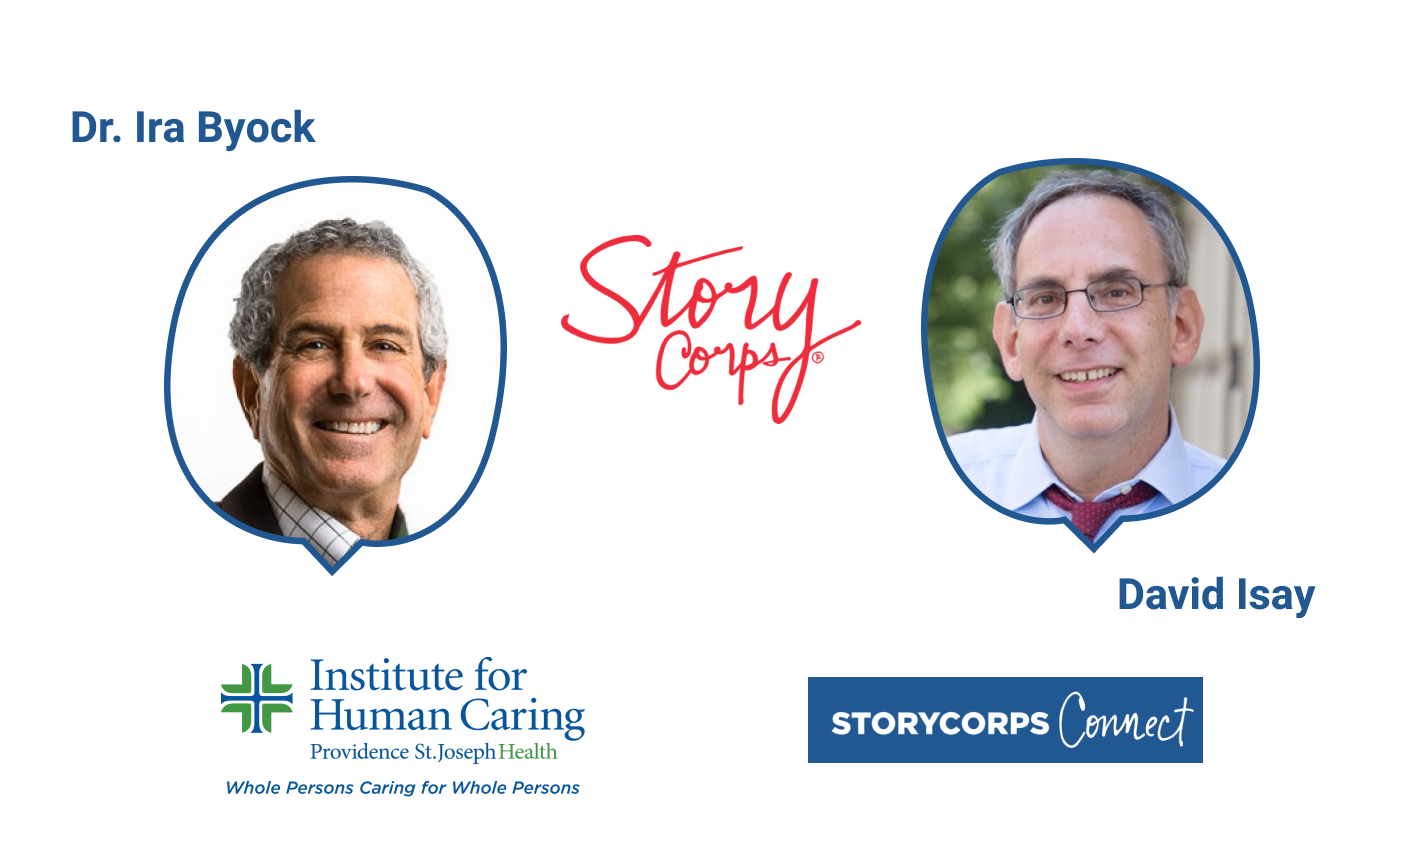 Fireside Chat with Dr. Ira Byock & StoryCorps' David Isay